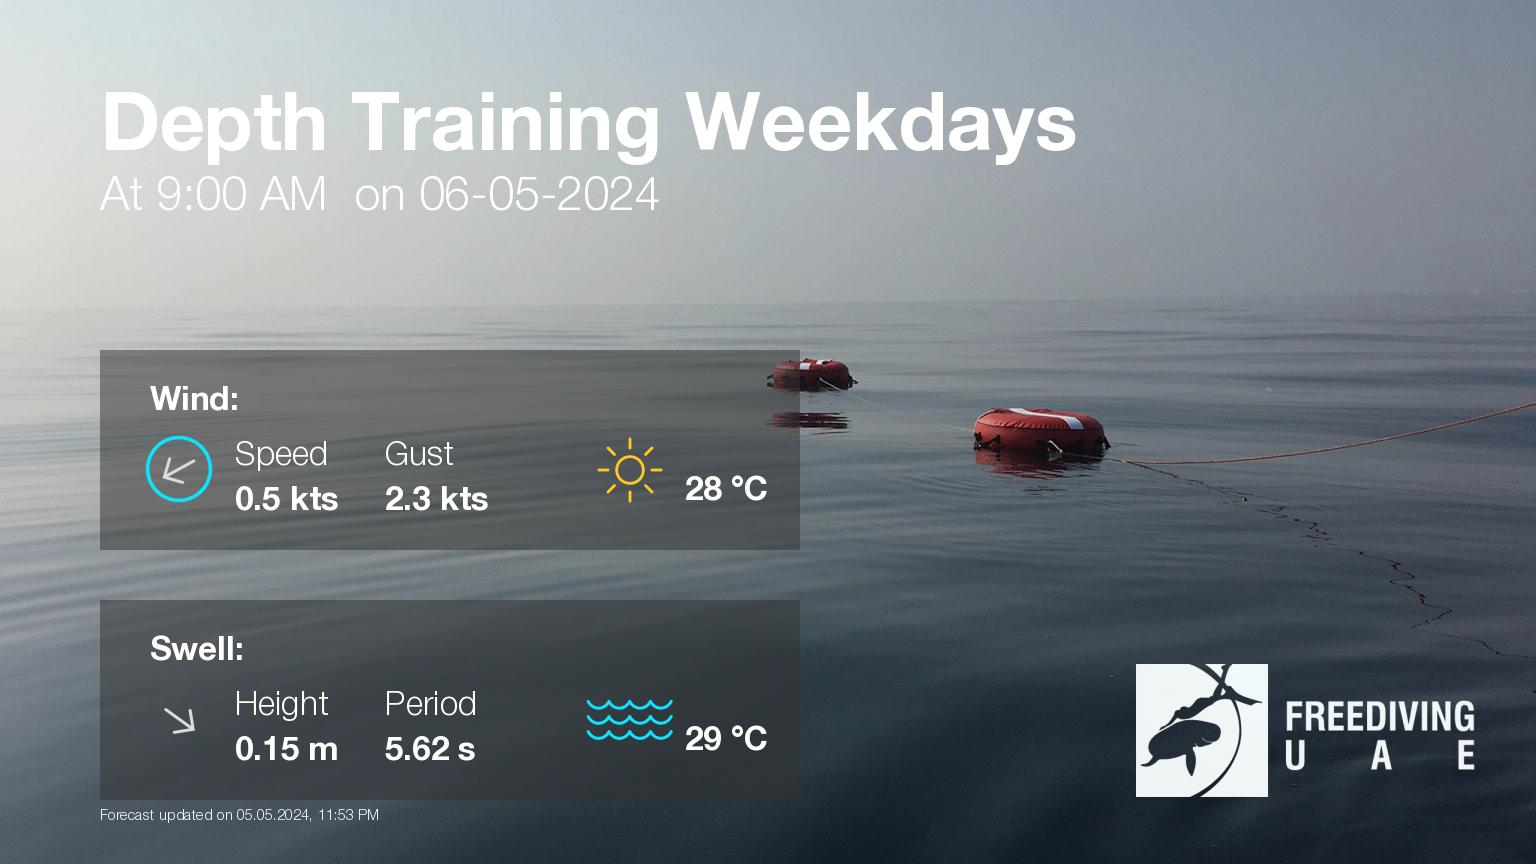 Expected weather during Depth Training Weekdays on Mon, May 6, at 9:00 AM